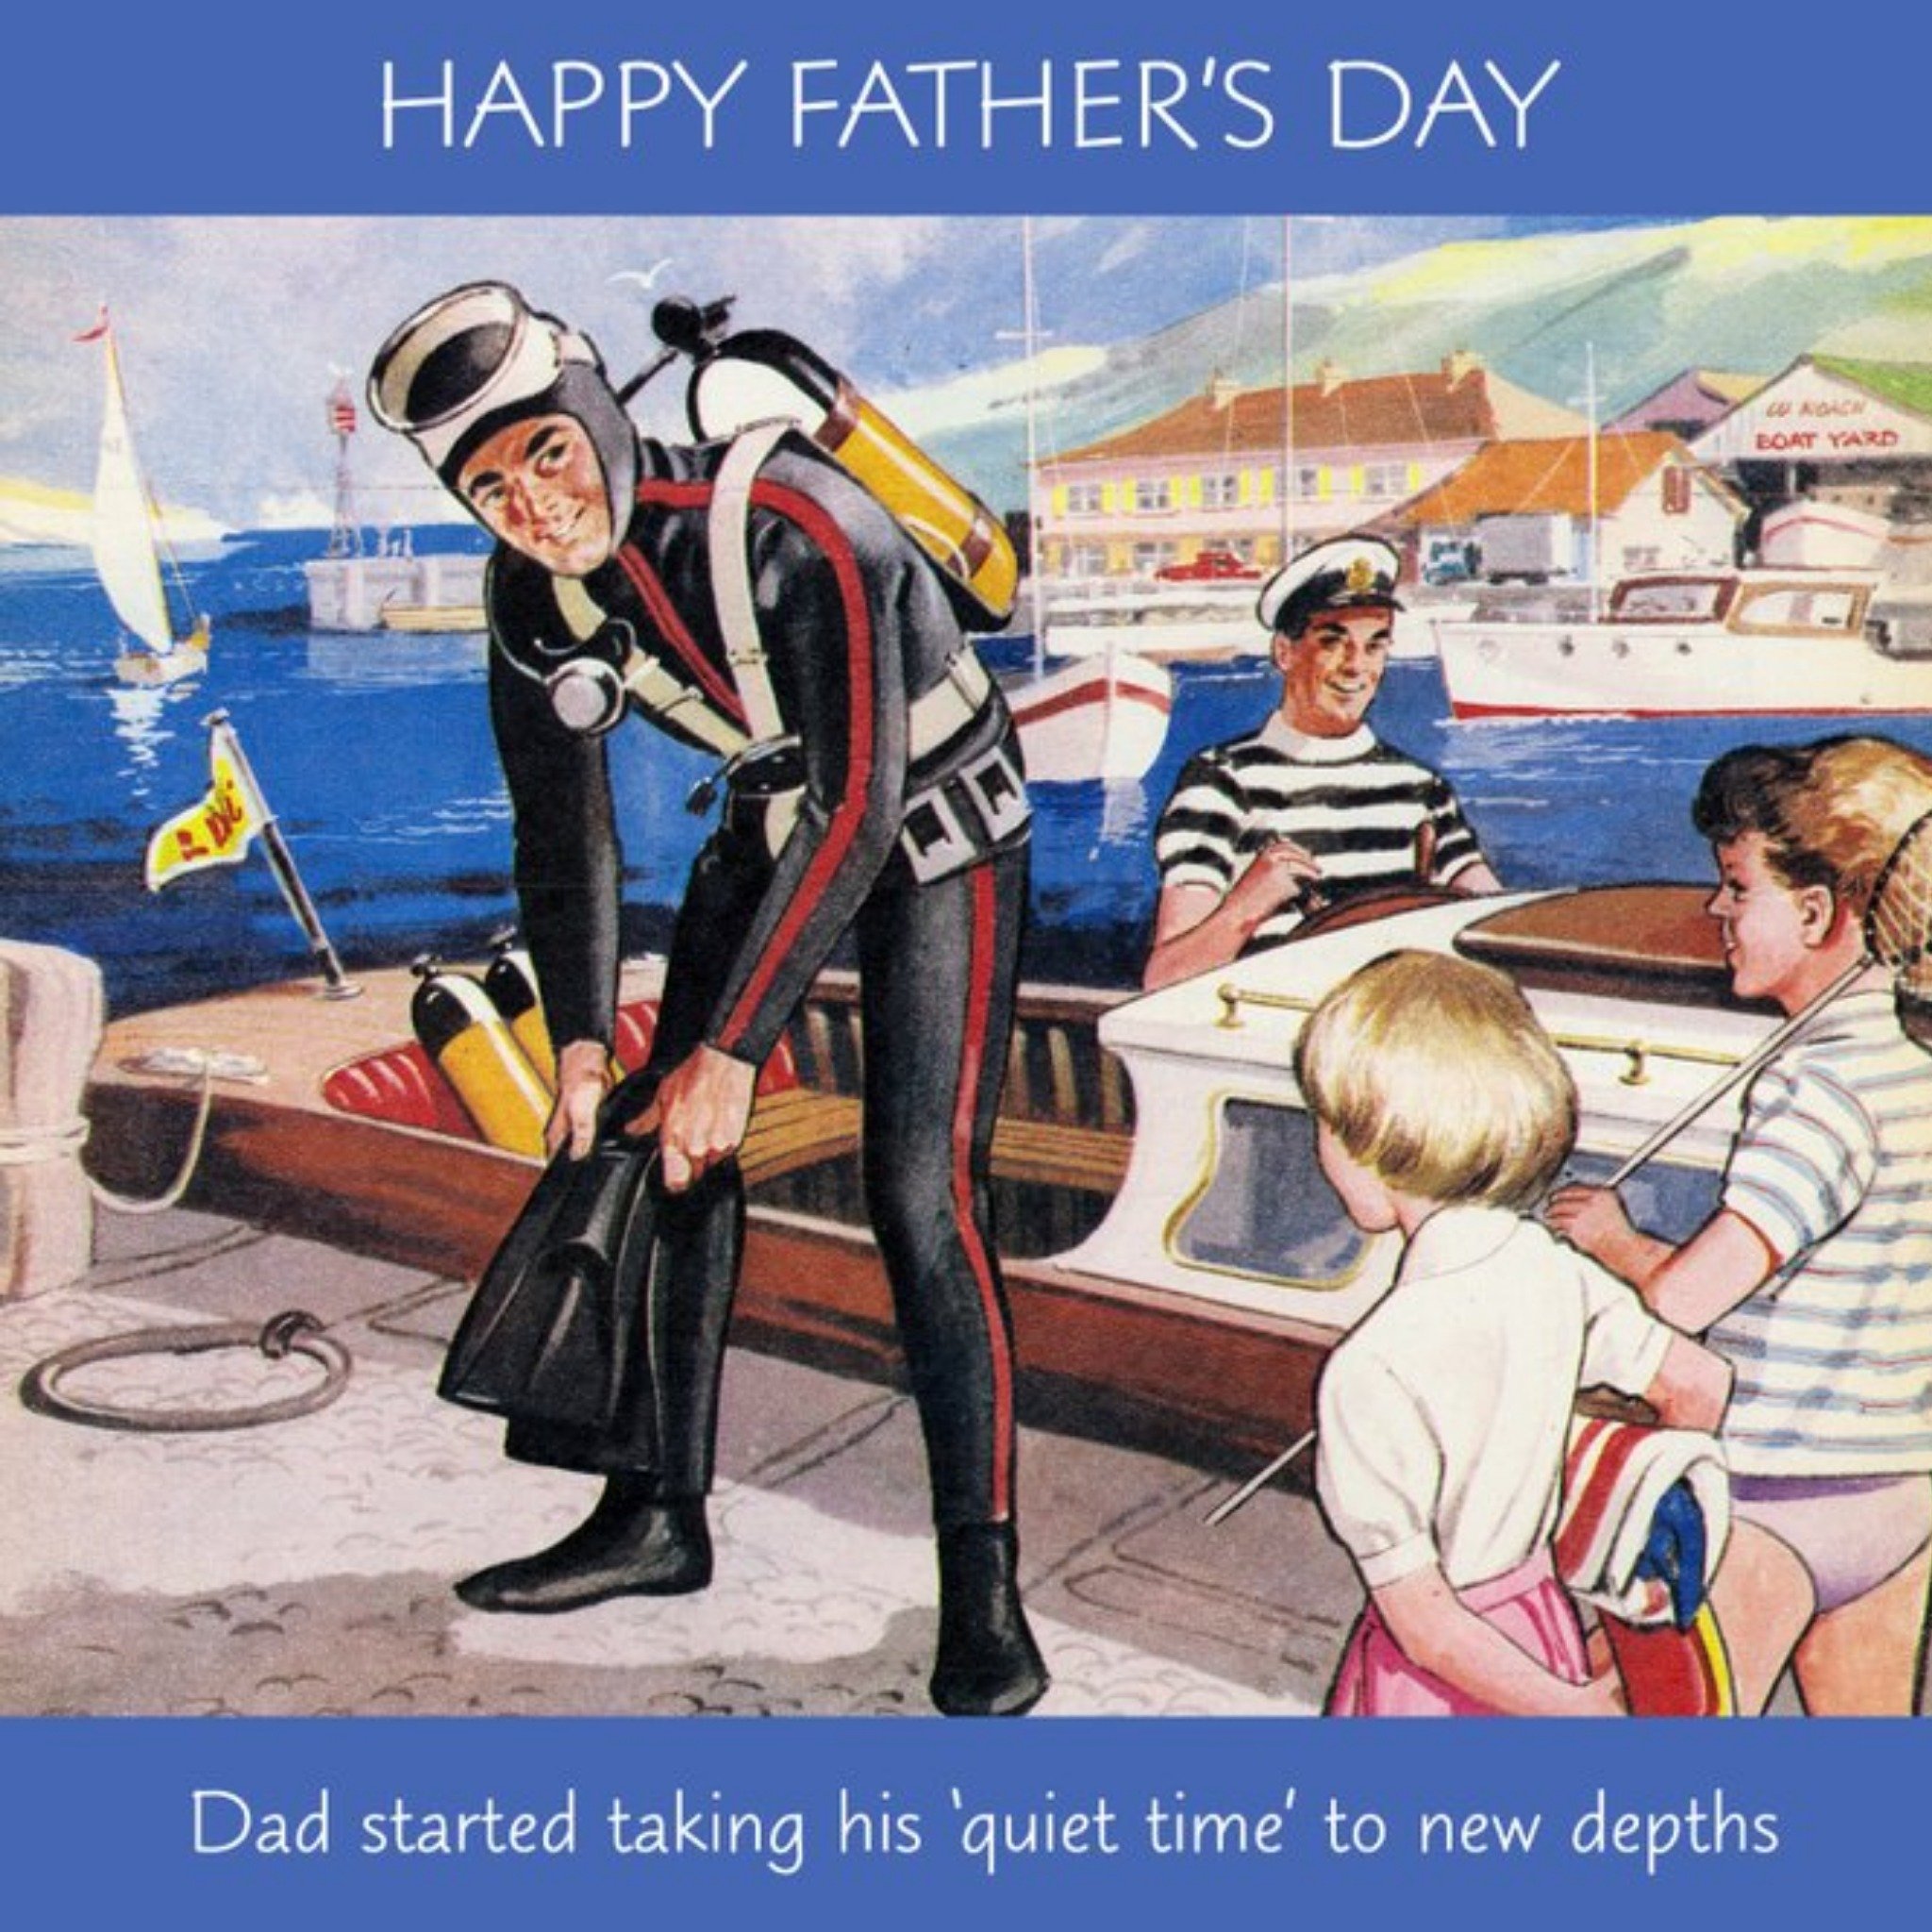 Moonpig Father's Day Card - Scuba Dive - Sailing - Funny Card, Large